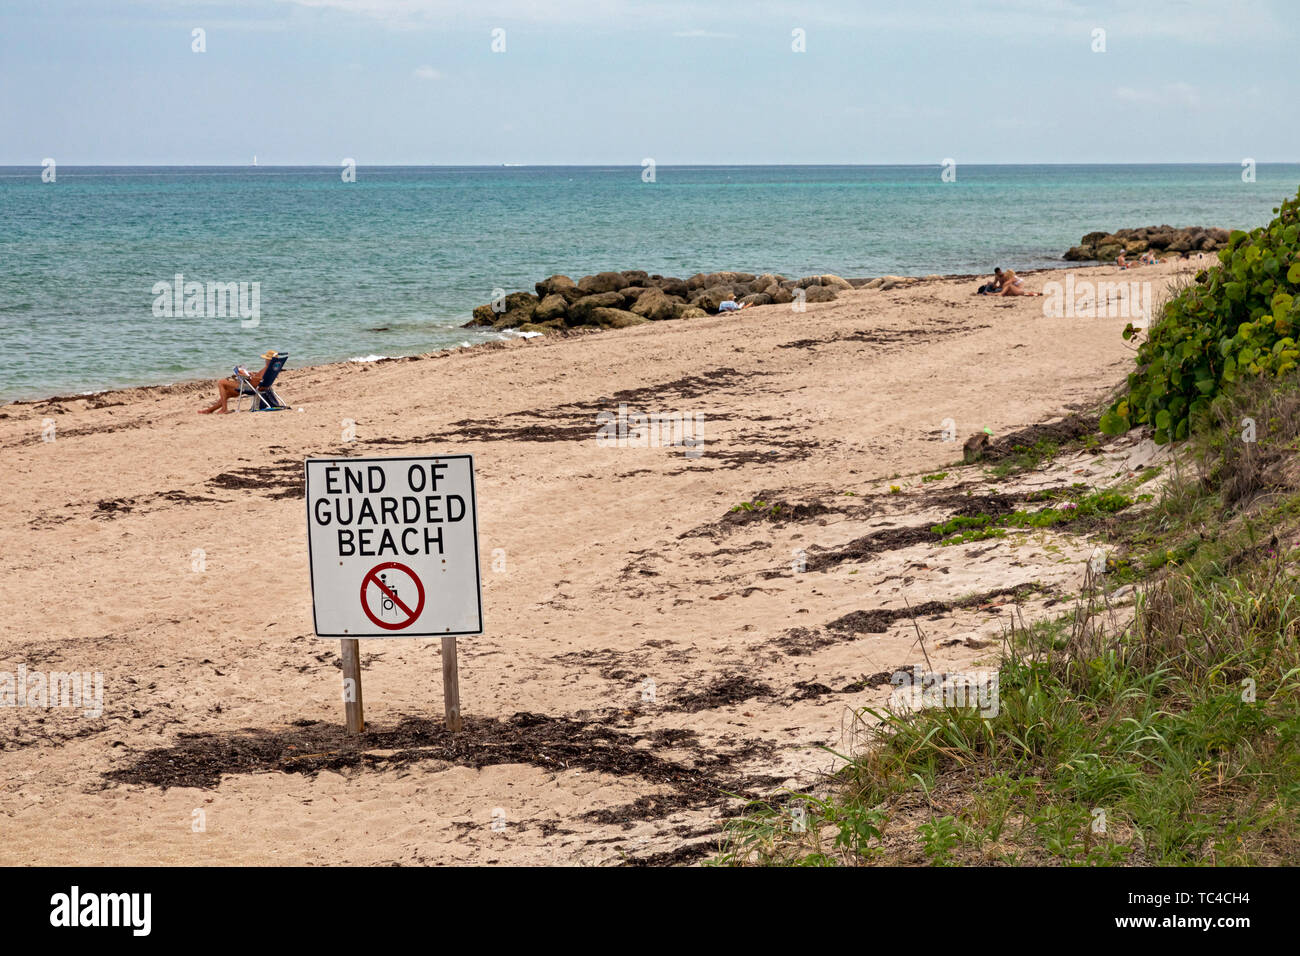 West Palm Beach, Florida - A sign warns that no lifeguards are provided beyond a sign on the beach along the Atlantic Ocean. Stock Photo